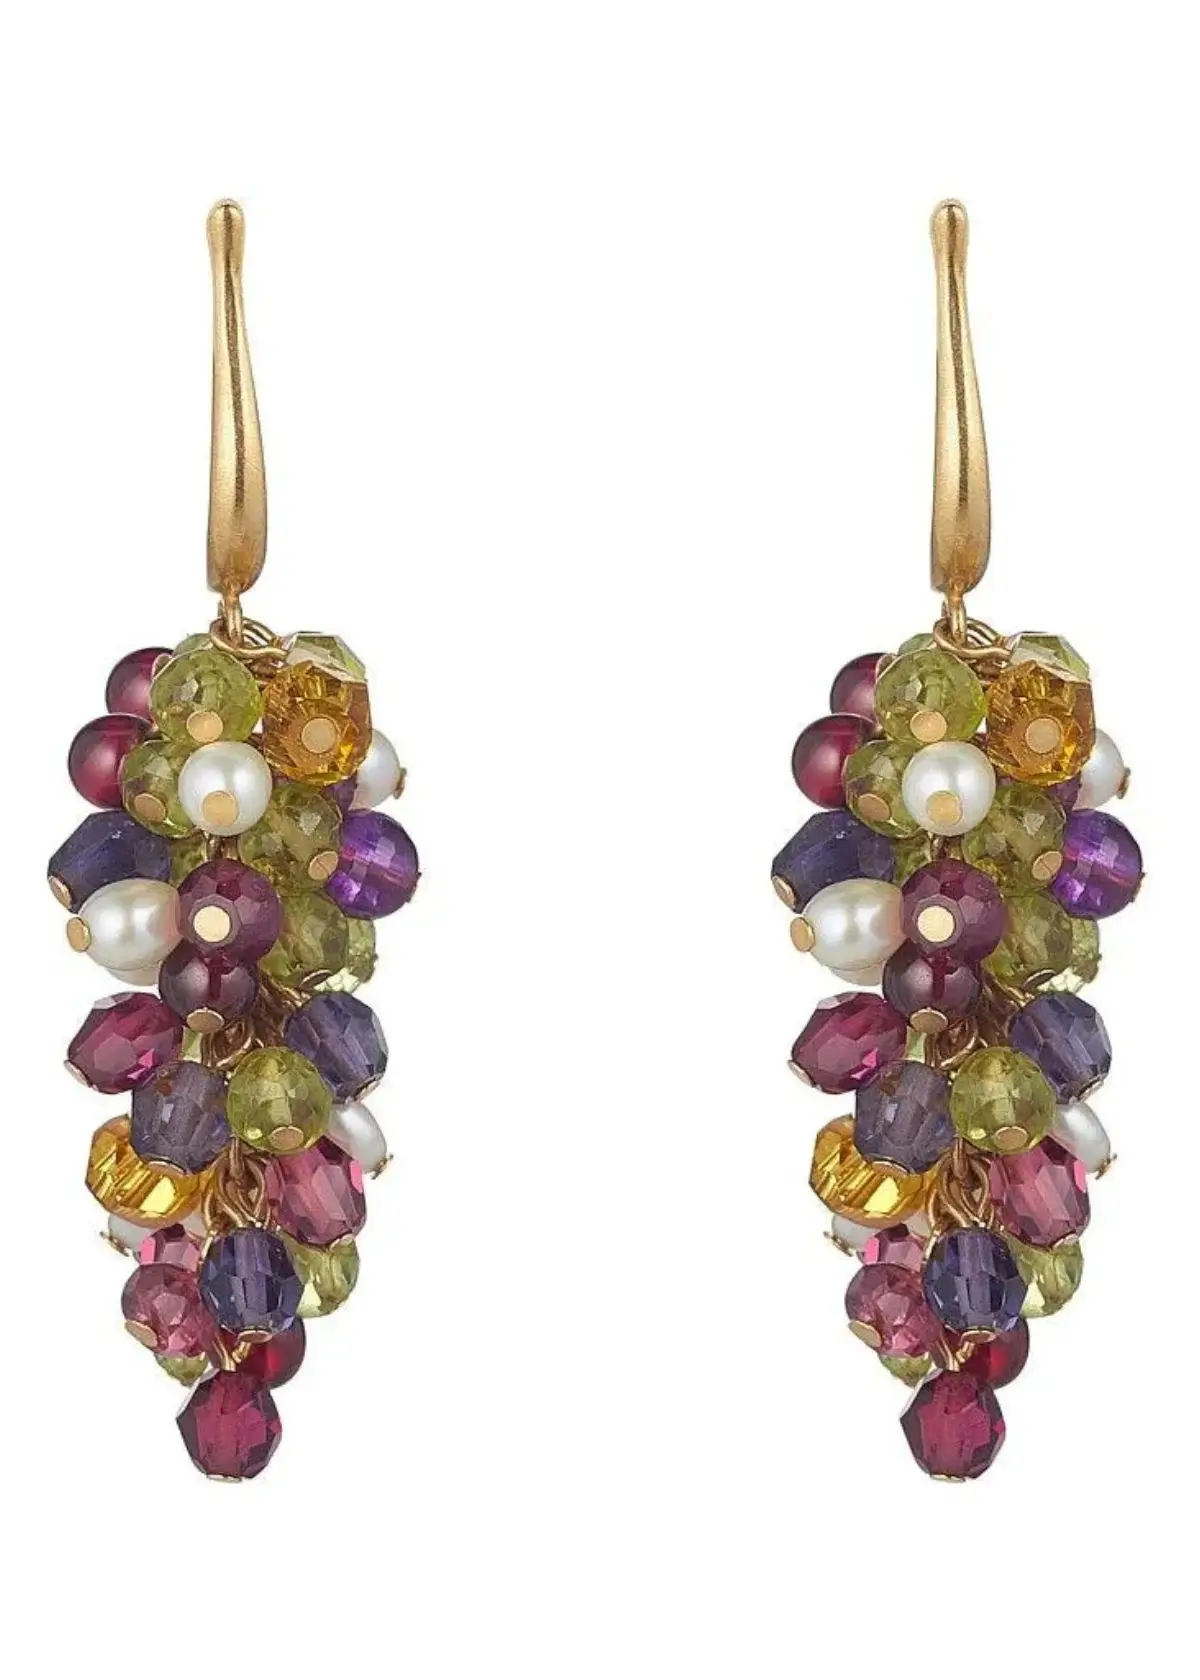 What are grape earrings? 